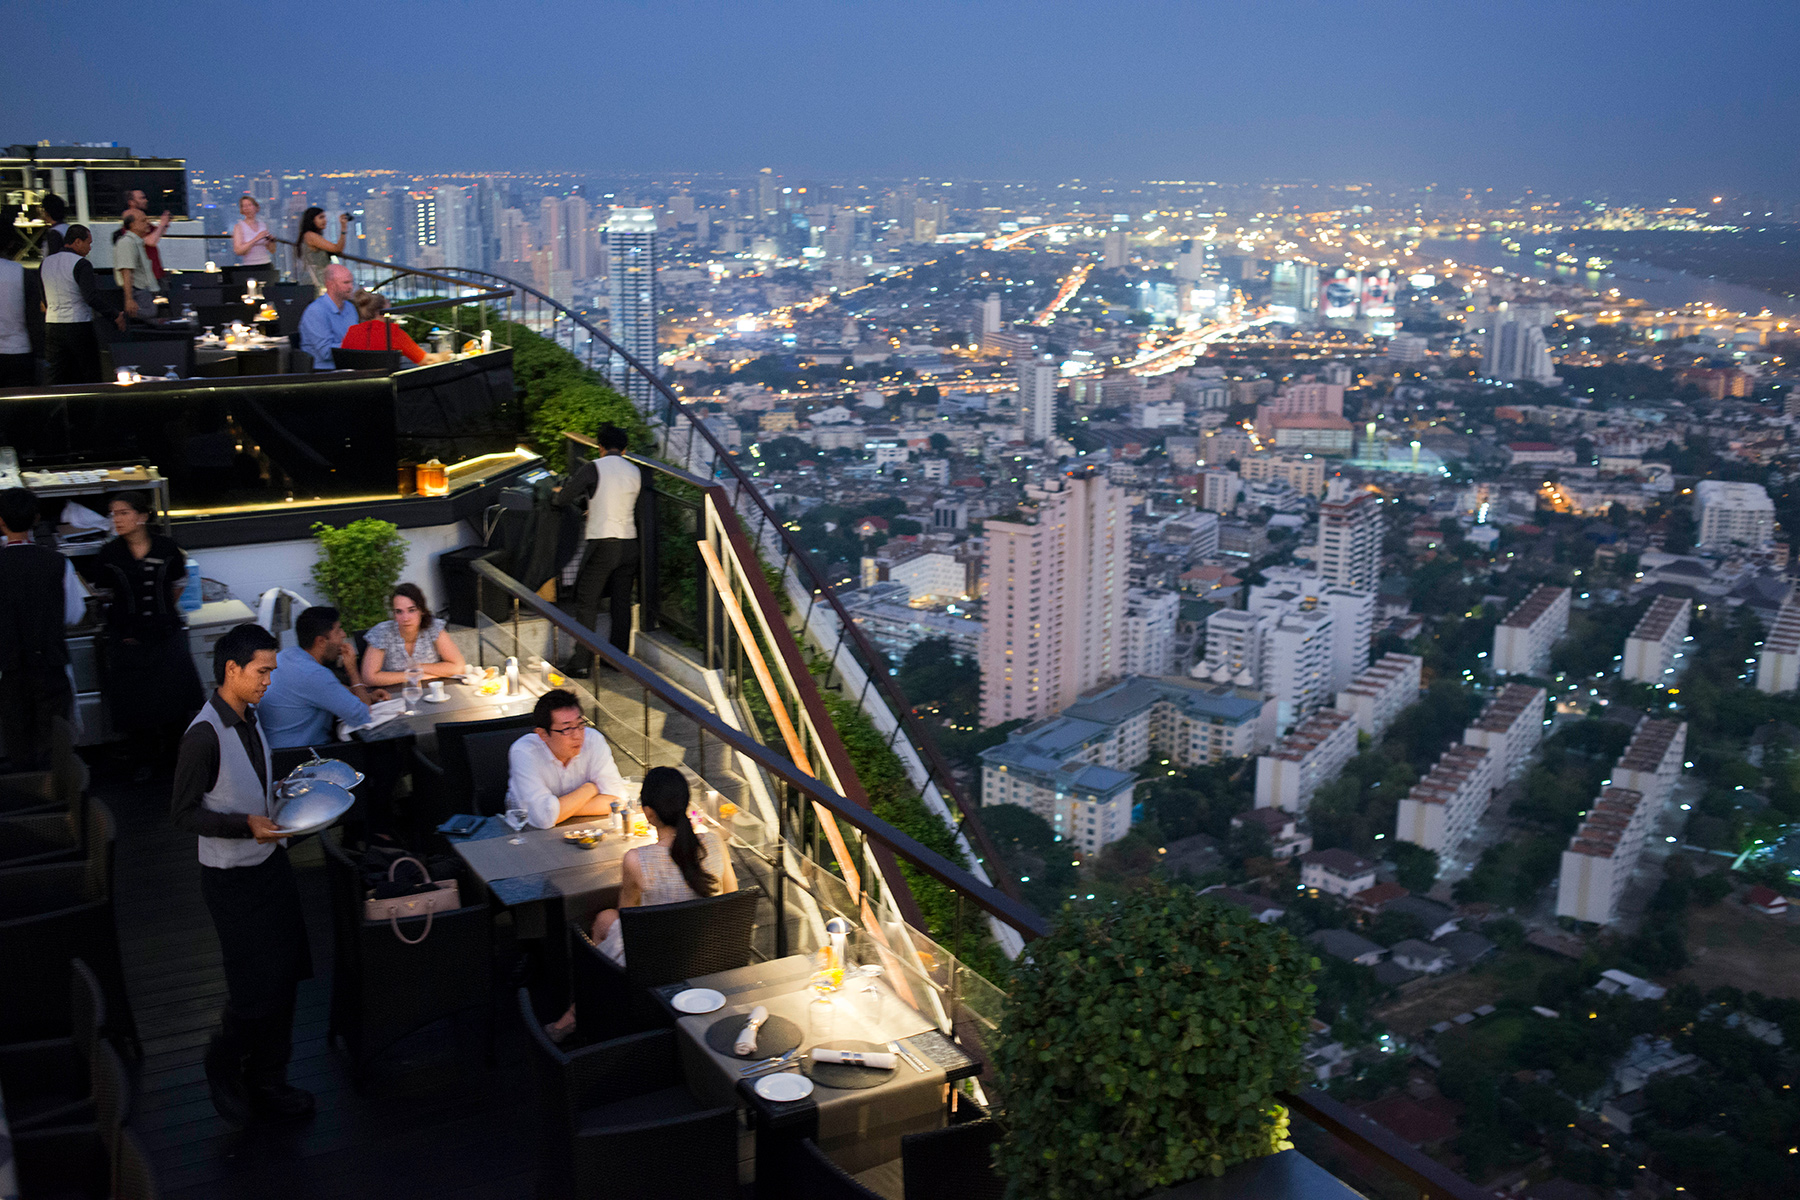 People eating at a rooftop restaurant in Bangkok